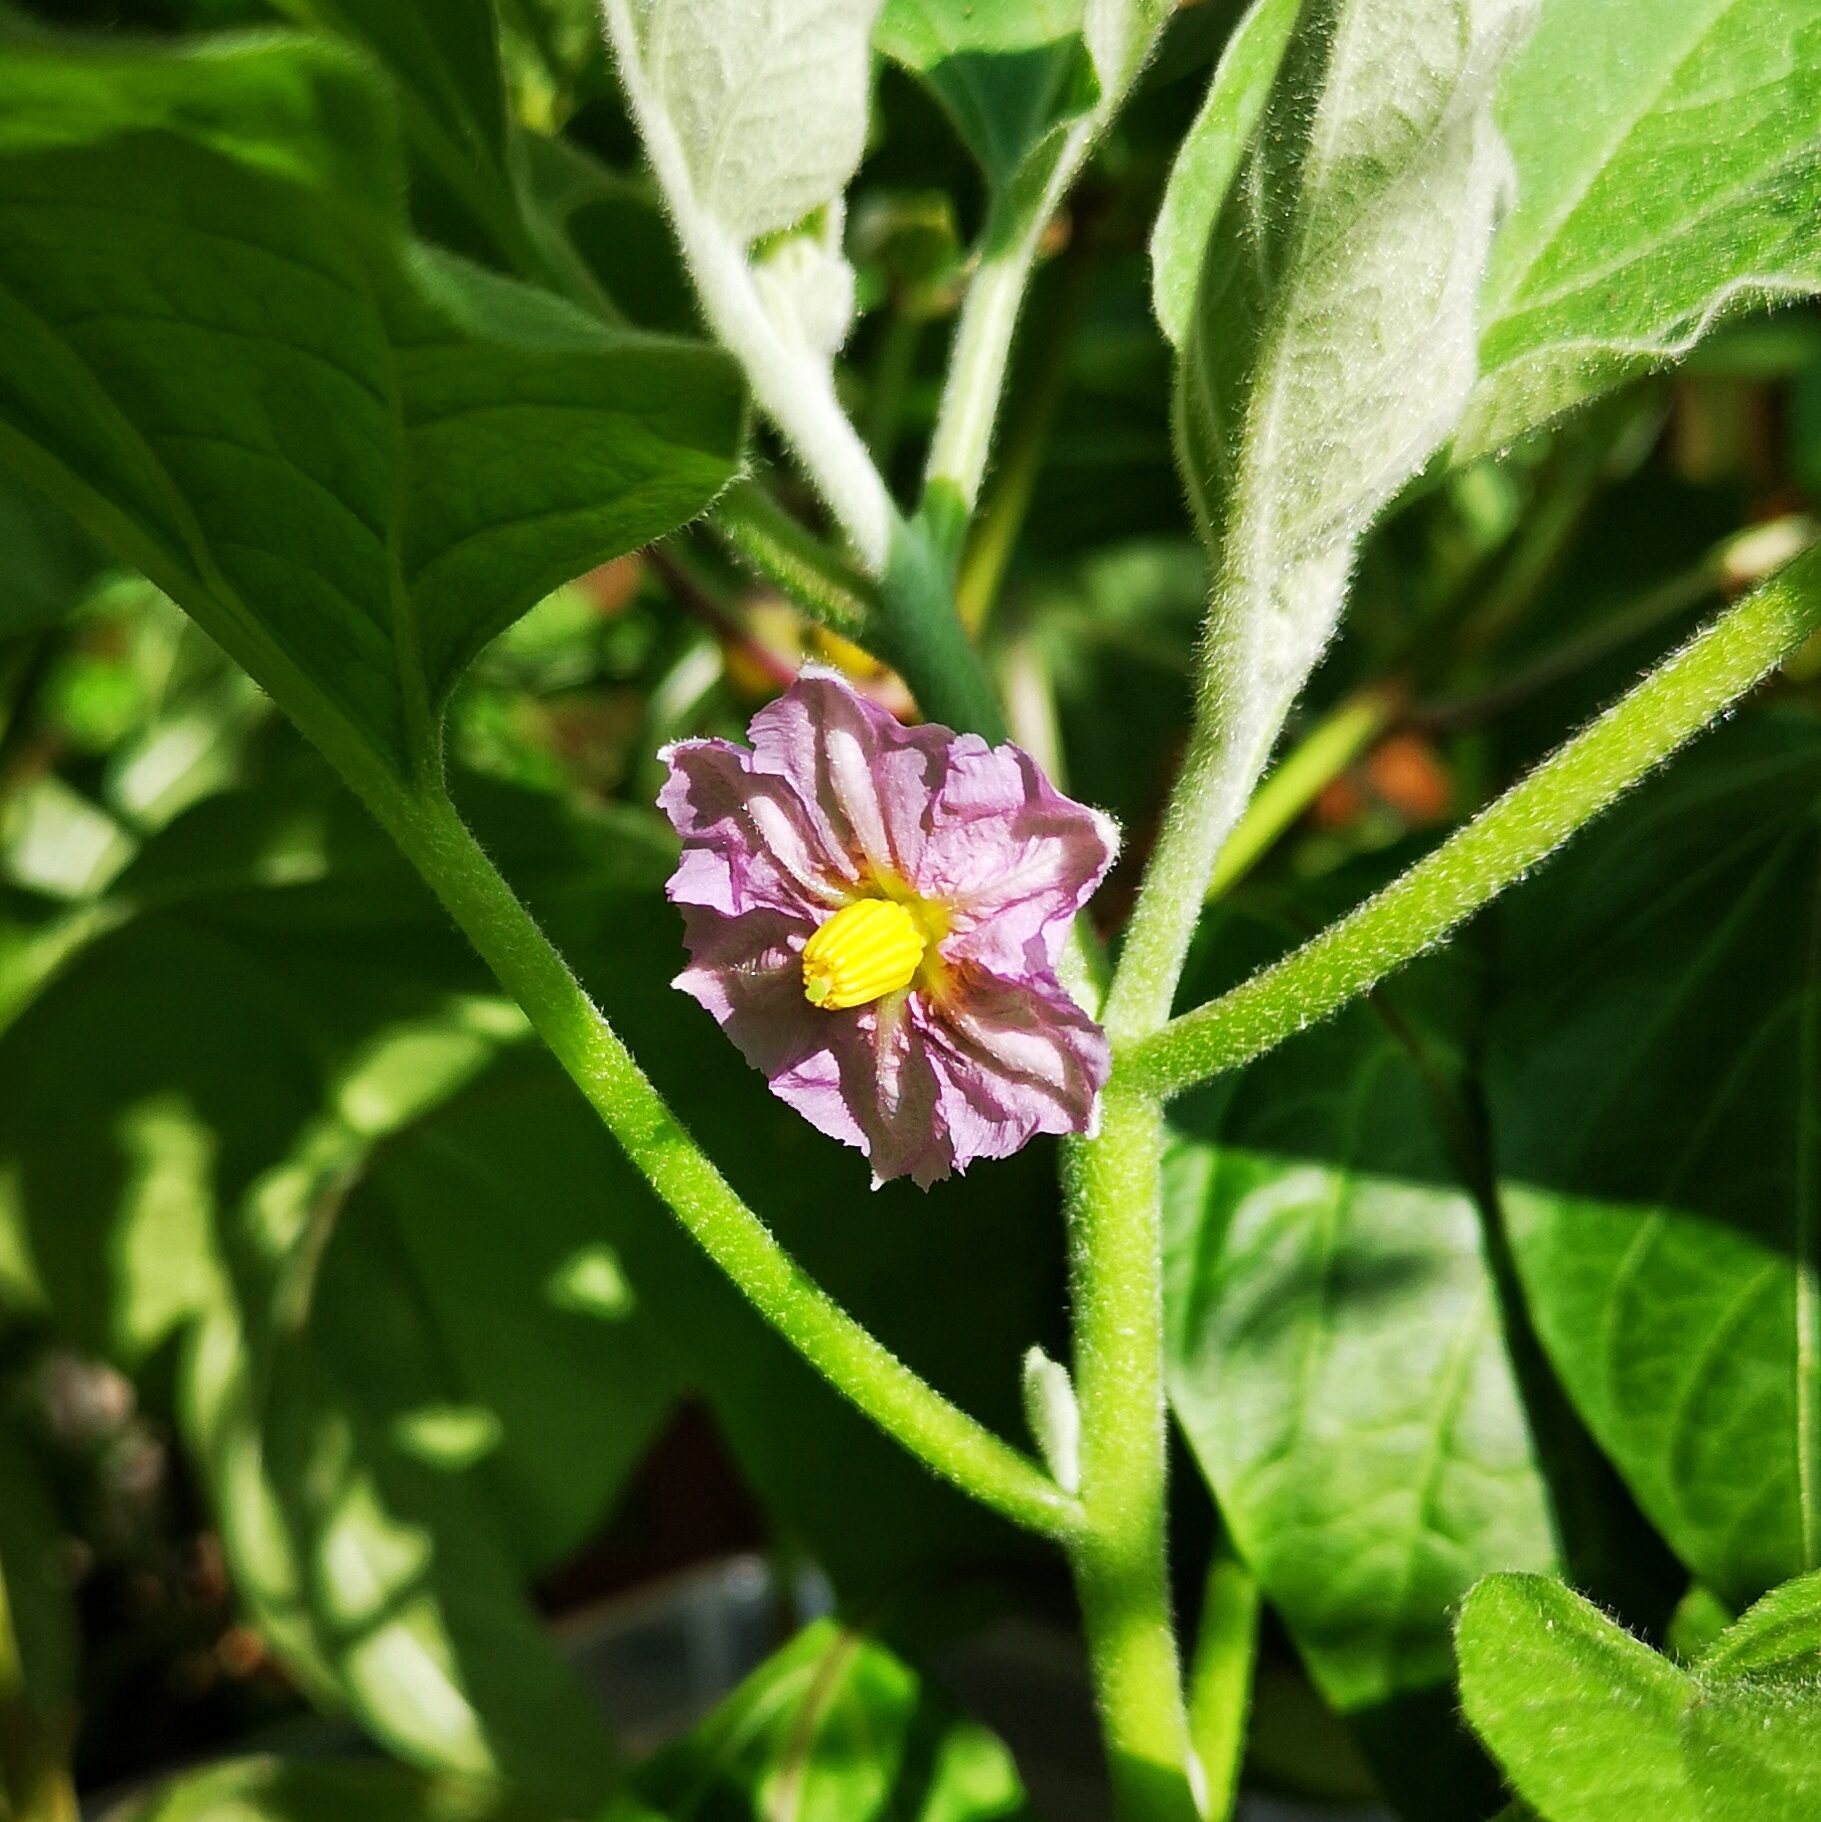 First bloom of the Pinstripe Aubergine